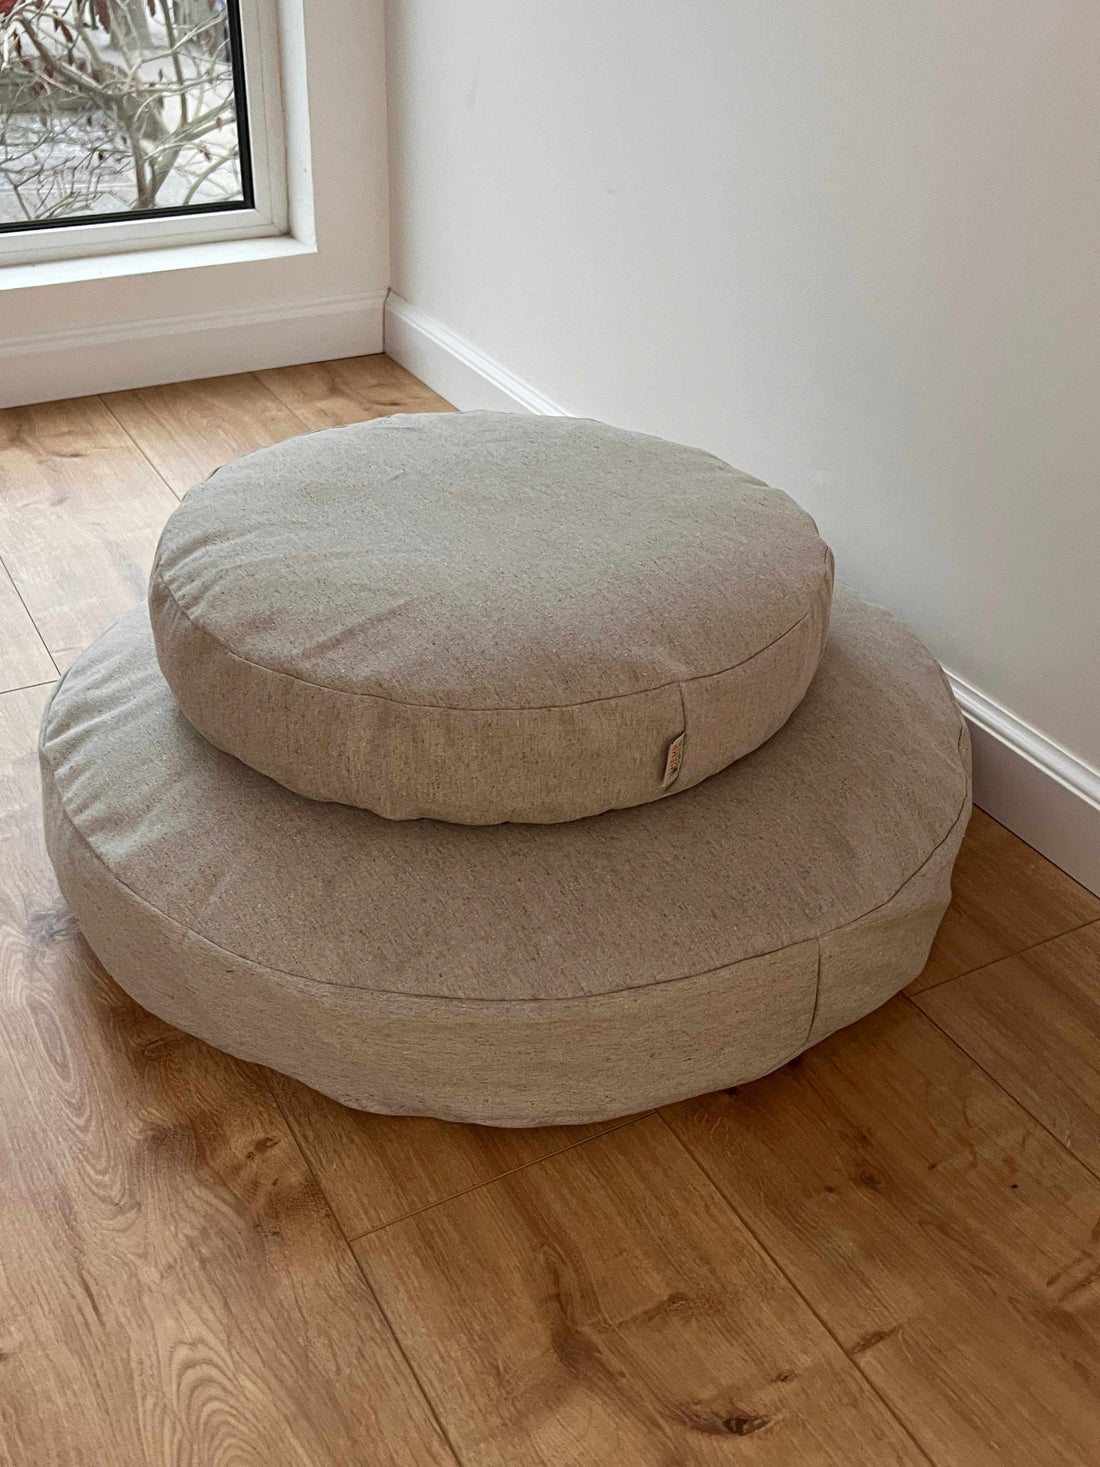 Round Hemp cushion with removable cover Hemp fiber filling in cotton fabric with linen non-dyed cover Floor cushion custom made size